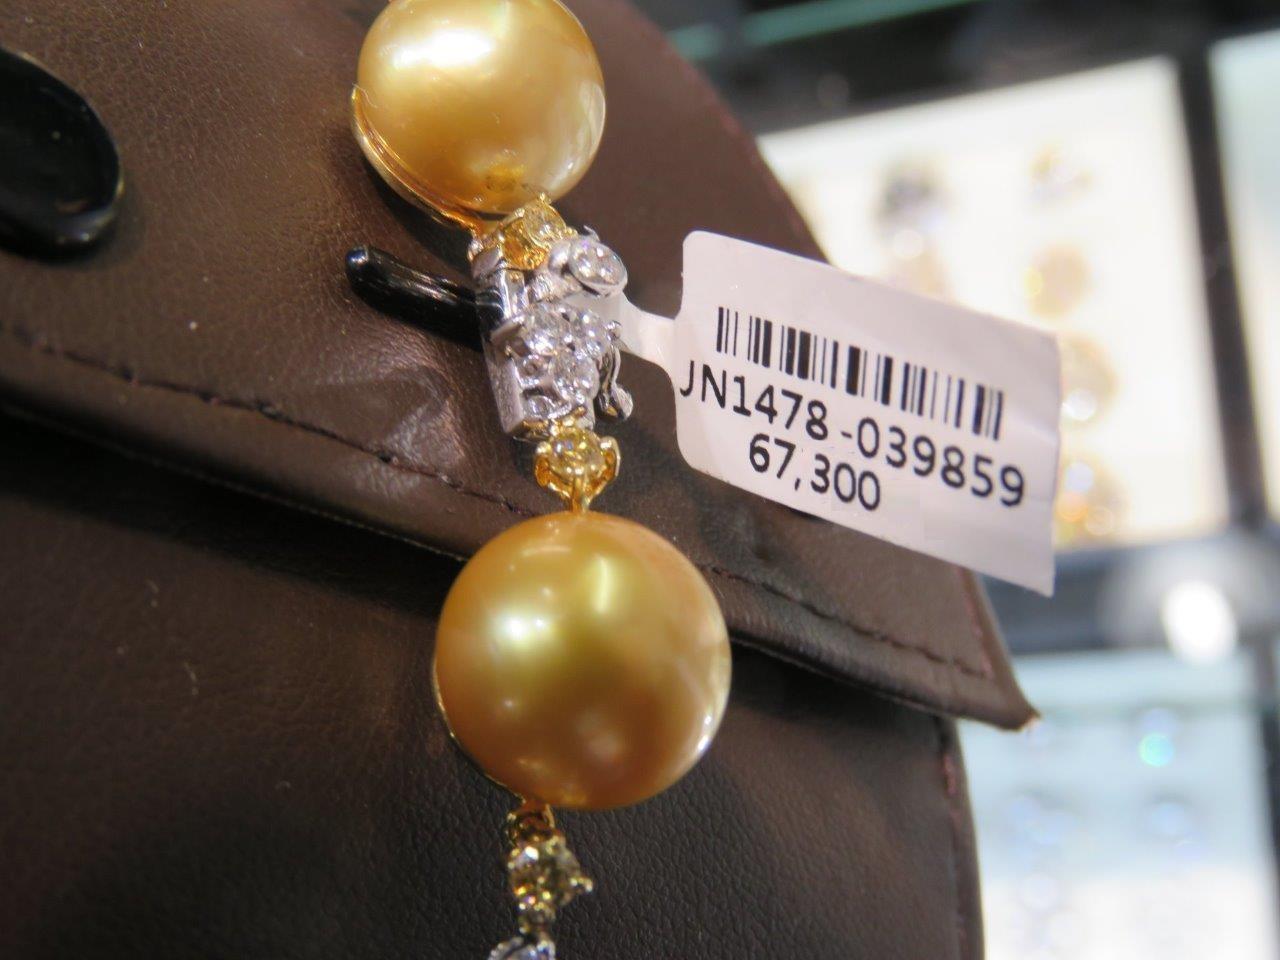 NWT 67, 300 Gorgeous 18KT Gold South Sea Pearl Fancy Yellow Diamond Necklace In Excellent Condition For Sale In New York, NY